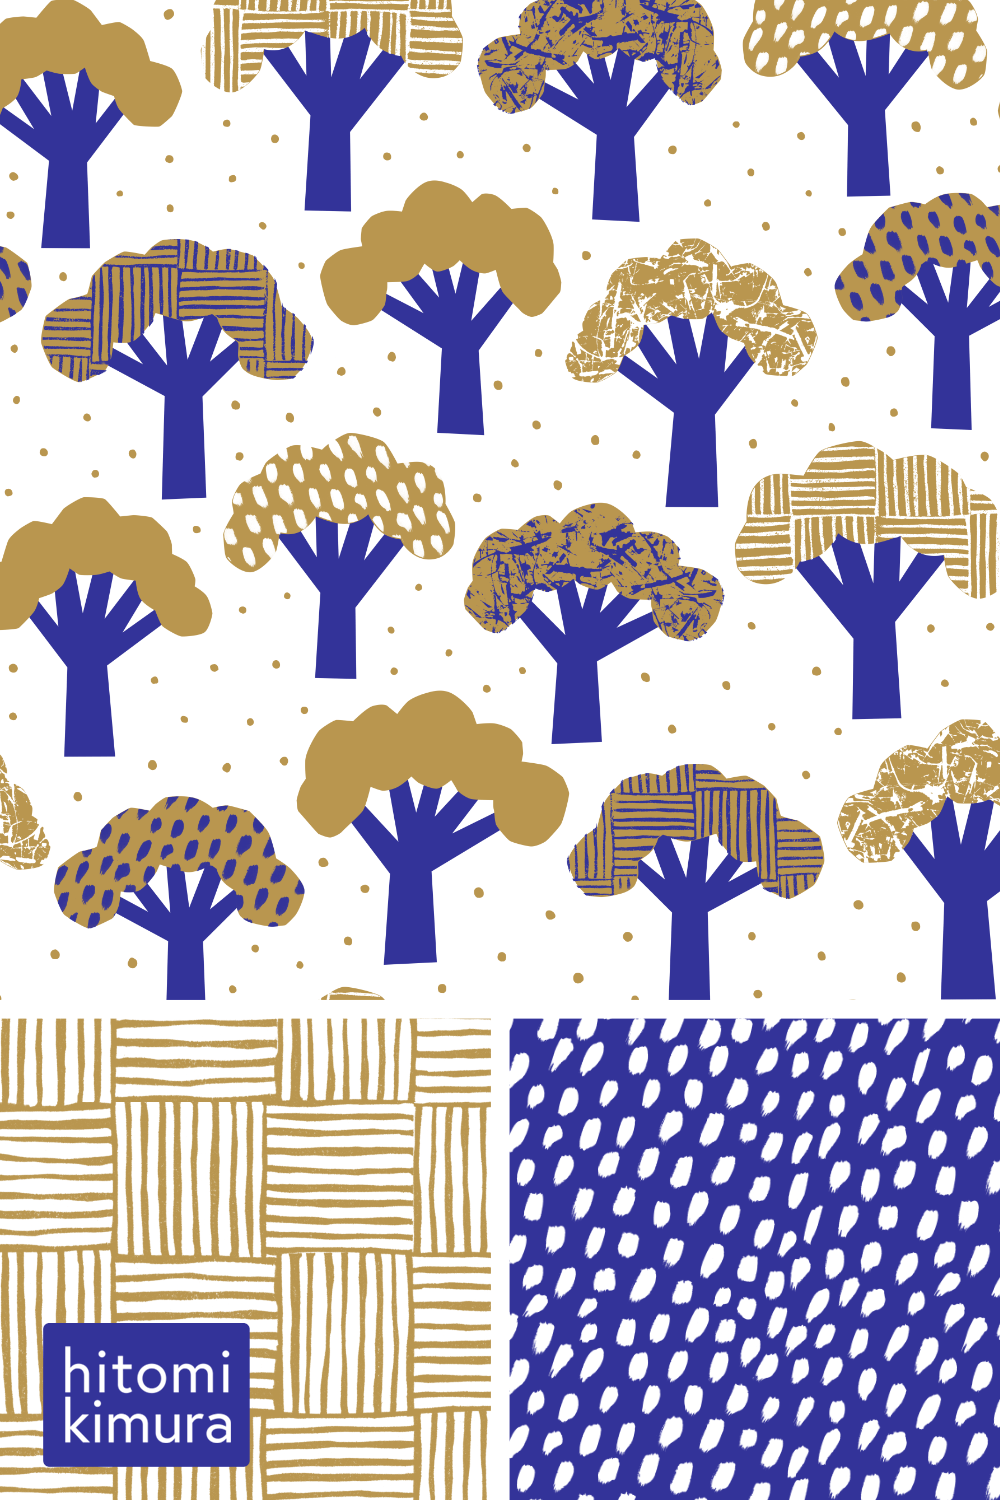 Design Process: Fan Tree Woodland Collection